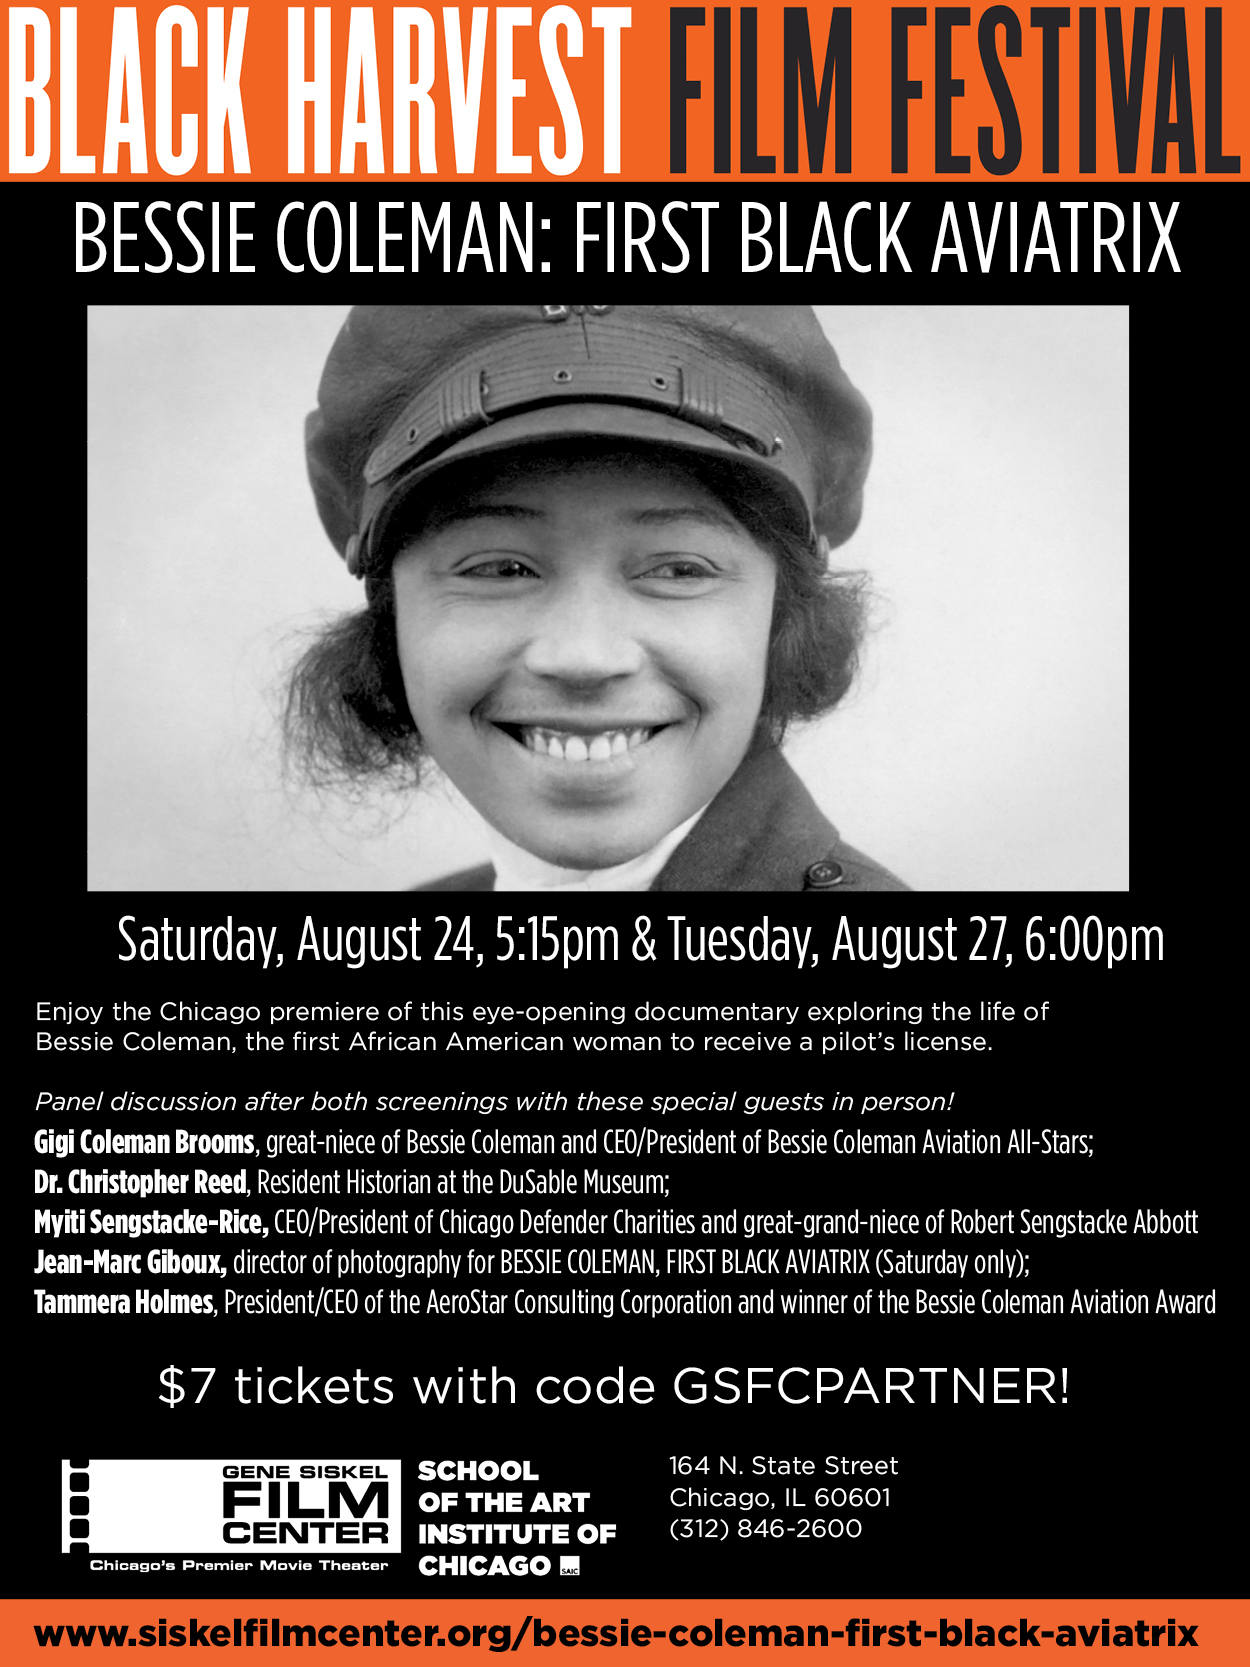 Premiere Screenings Of Bessie Coleman, First Black Aviatrix As Part Of The 25th The Black Harvest Film Festival